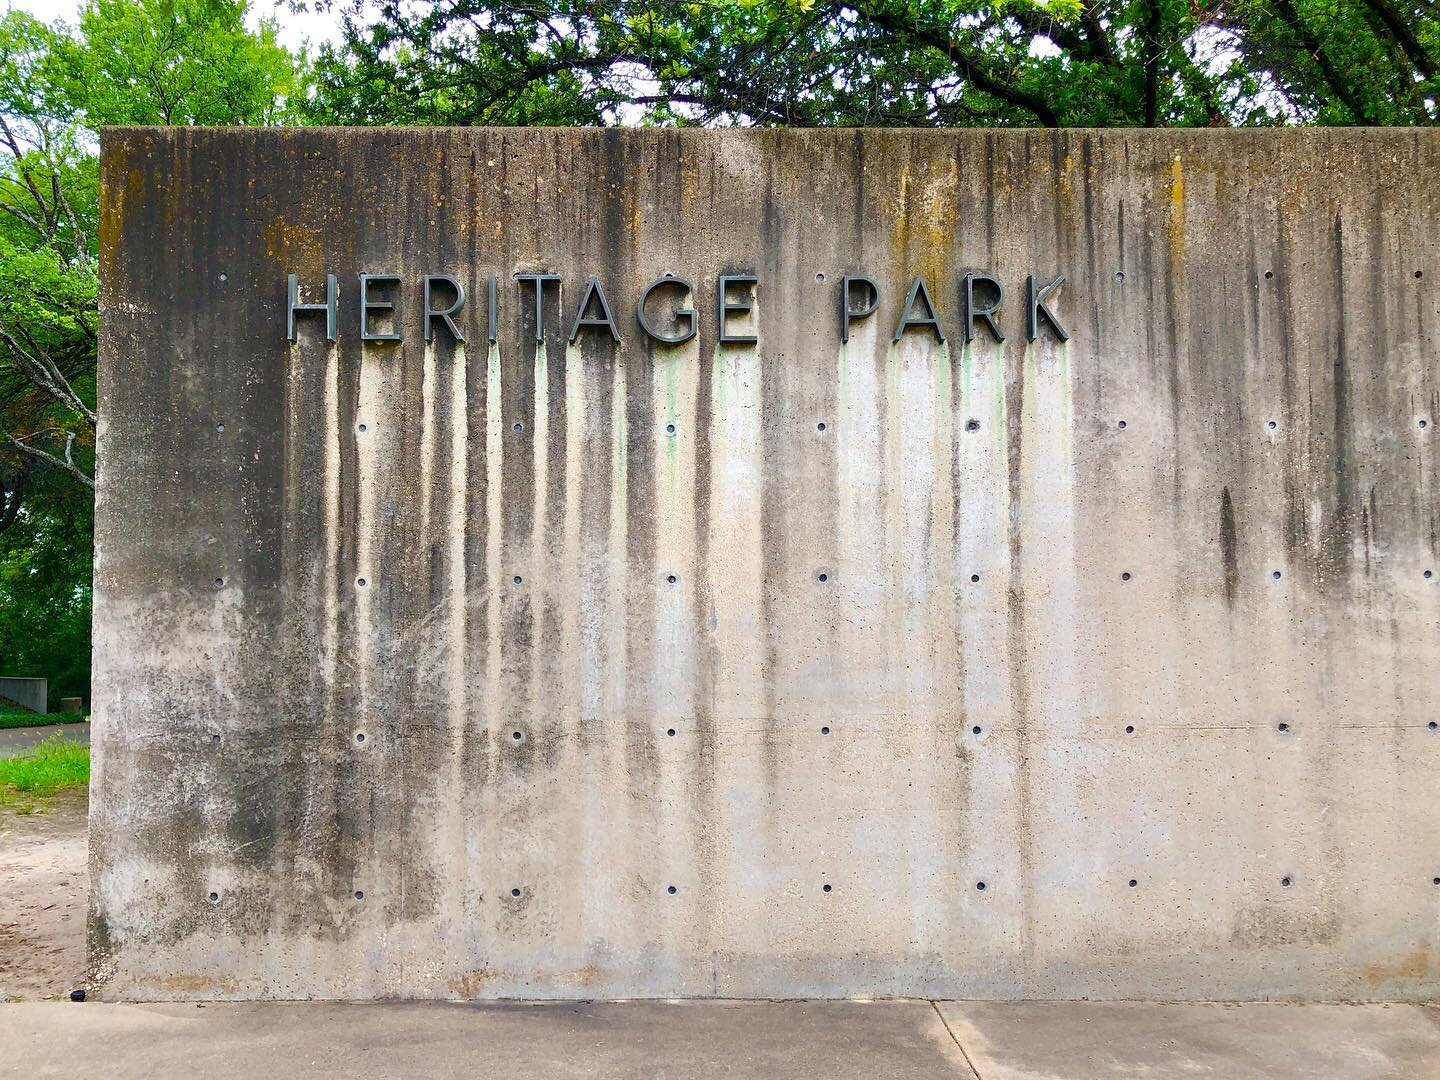 Honored and excited to have toured #lawrencehalprin &lsquo;s #heritagepark in #fortworth yesterday as part of a site visit for new project. Thank you #artscouncilfortworth and  #downtownfortworthinc for the awesome tour!! Also happy to meet a local r